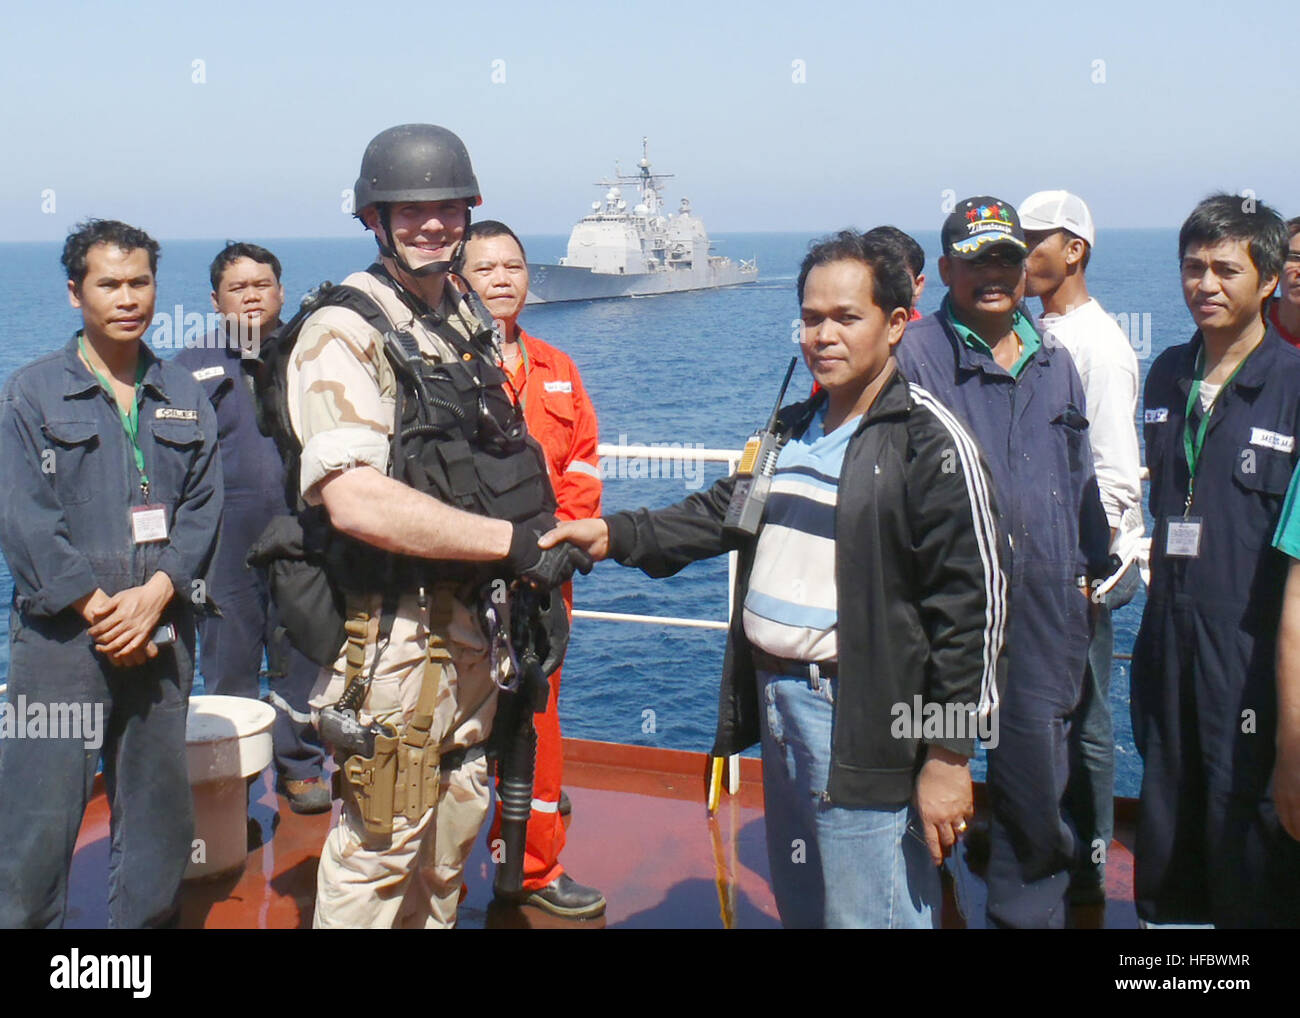 110325-N-BZ392-448 ARABIAN SEA (March 25, 2011) A member of the guided-missile cruiser USS Leyte Gulf (CG 55) visit, board, search and seizure team shakes hands with the master of the Philippine-flagged merchant vessel M/V Falcon Trader II, which had sent out a distress call reporting it had been boarded by pirates. Helicopters from the Leyte Gulf and USS Enterprise (CVN 65) responded to the call and were able to disrupt the attack. Leyte Gulf and Enterprise are supporting Operation Enduring Freedom and regional maritime security operations as part of their deployment to the U.S. 5th Fleet are Stock Photo